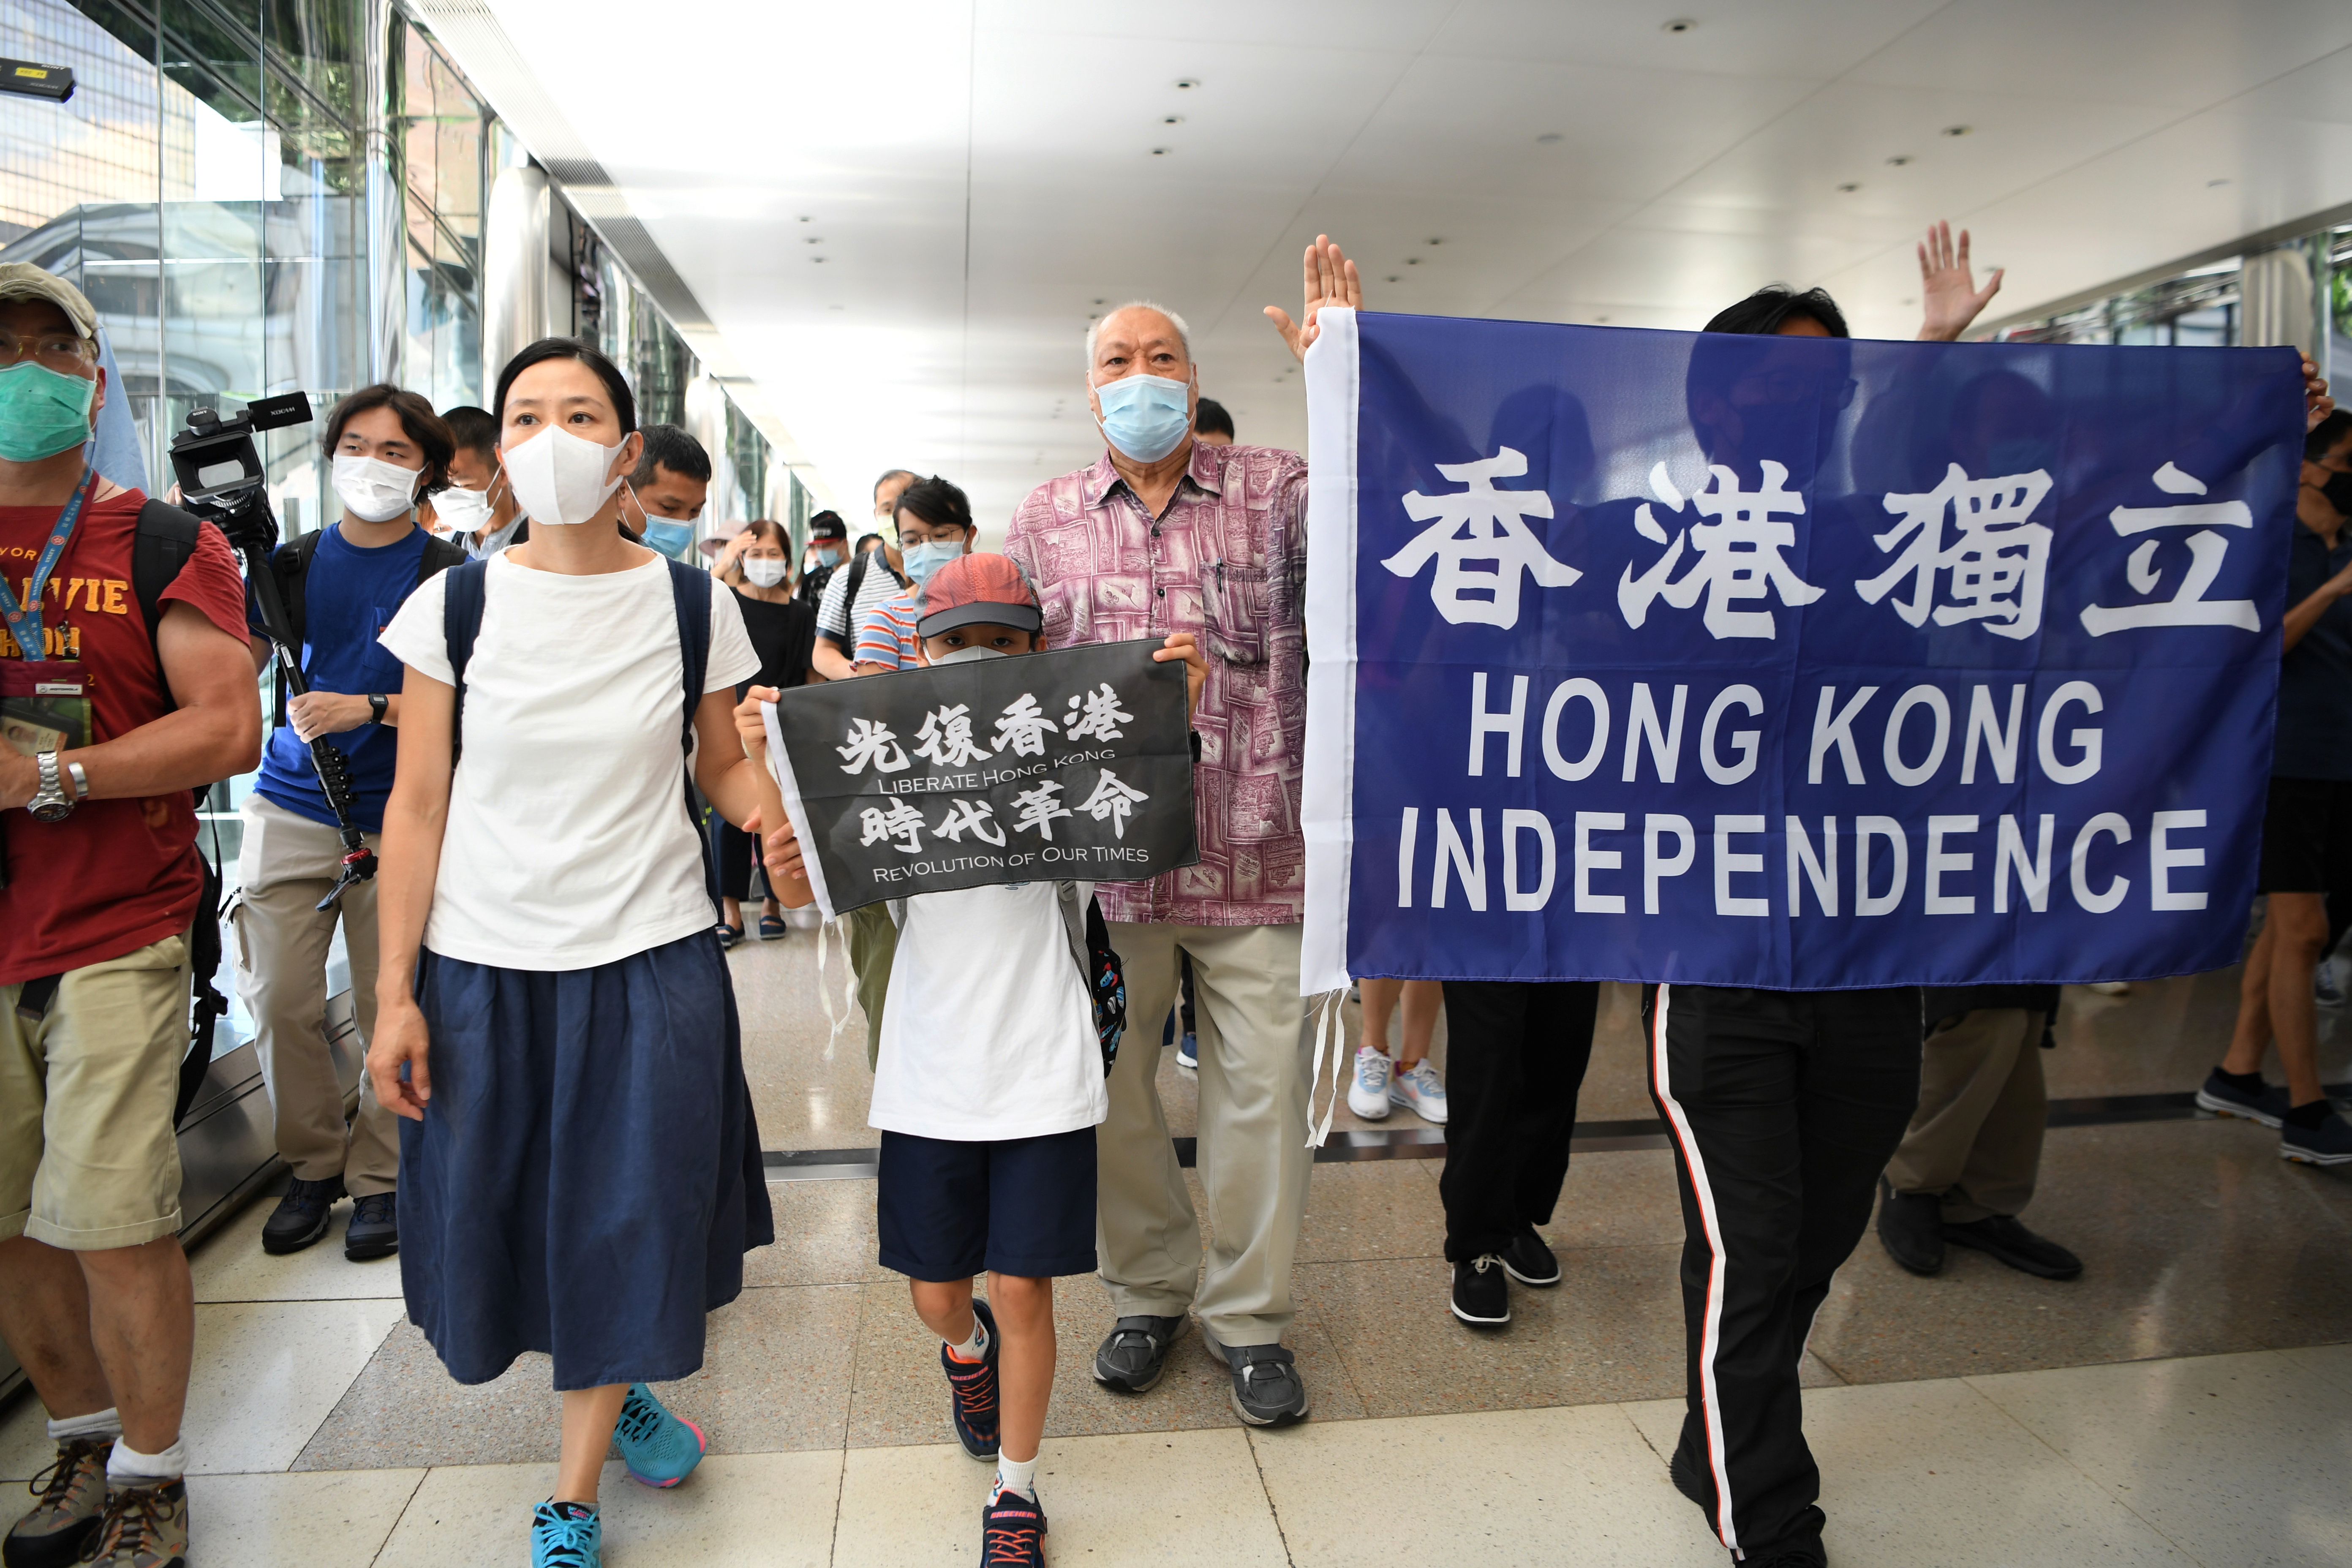 Pro-democracy protesters hold banners as they march during a lunchtime demonstration at the Pacific Place mall in Hong Kong, China June 12, 2020. REUTERS/Laurel Chor